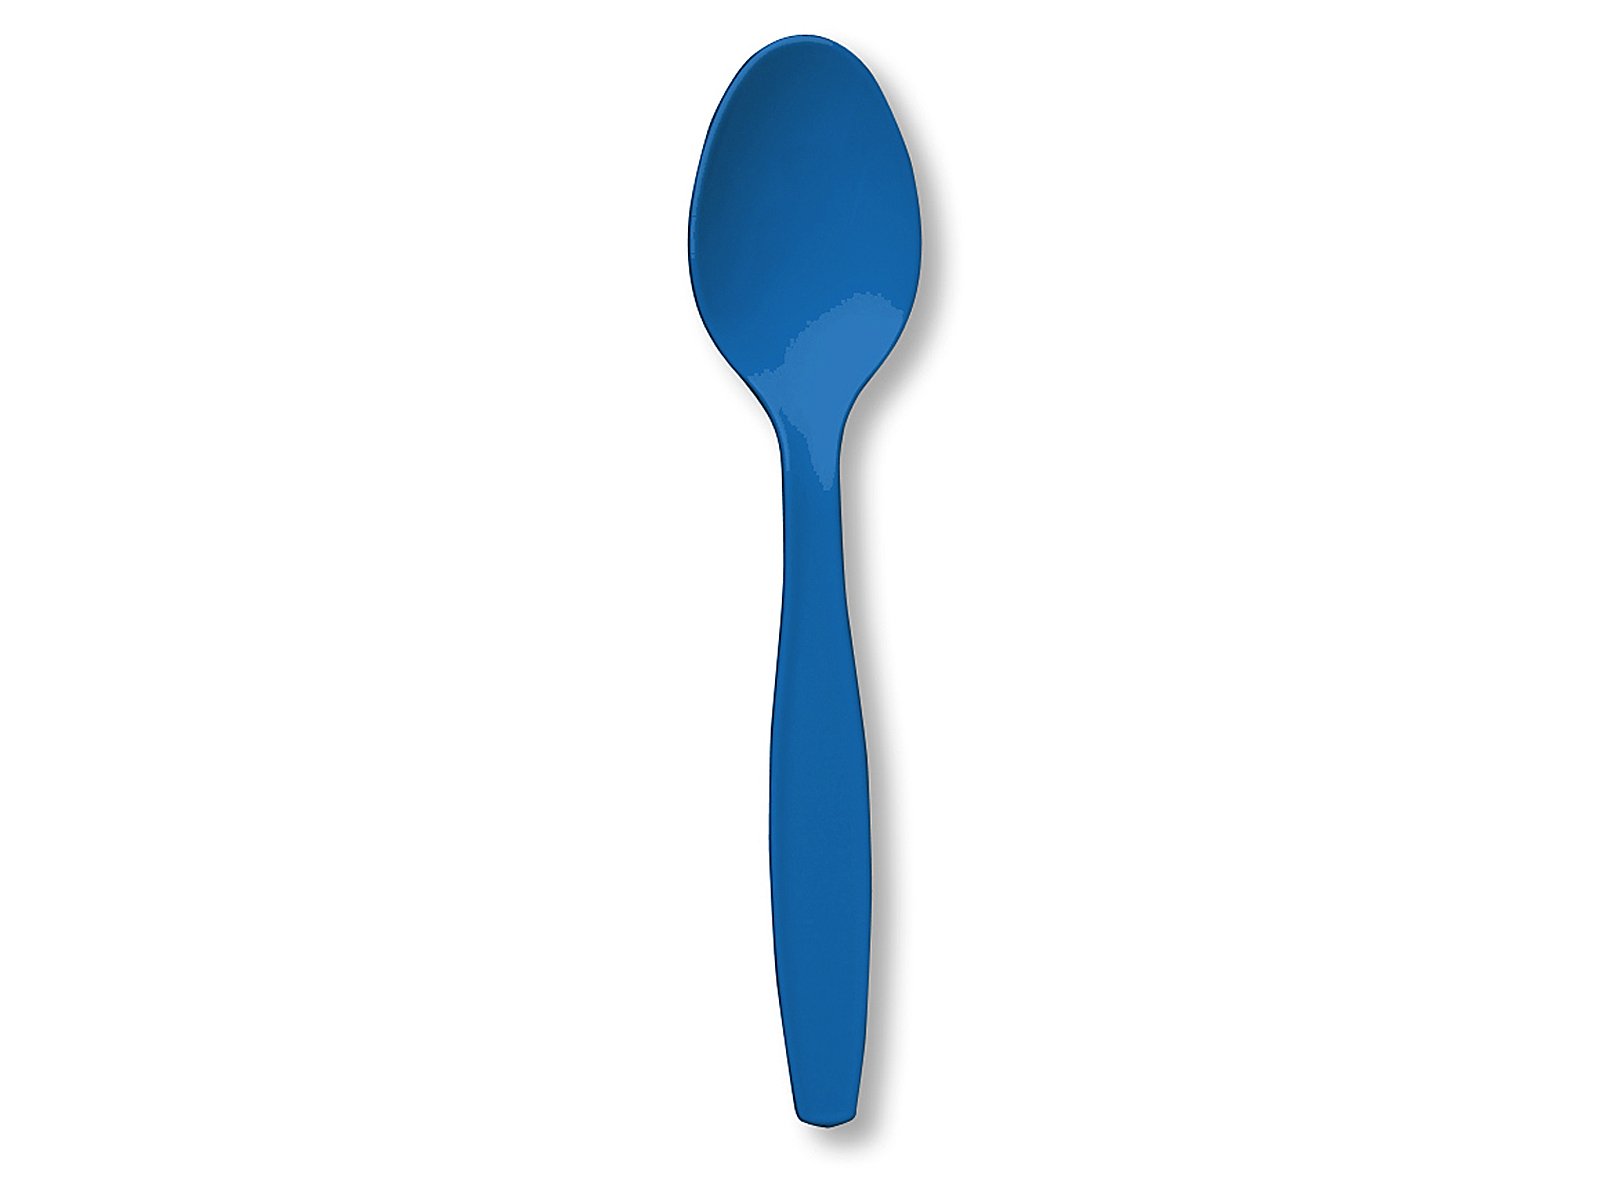 True Blue (Blue) Heavy Weight Spoons (24 count)